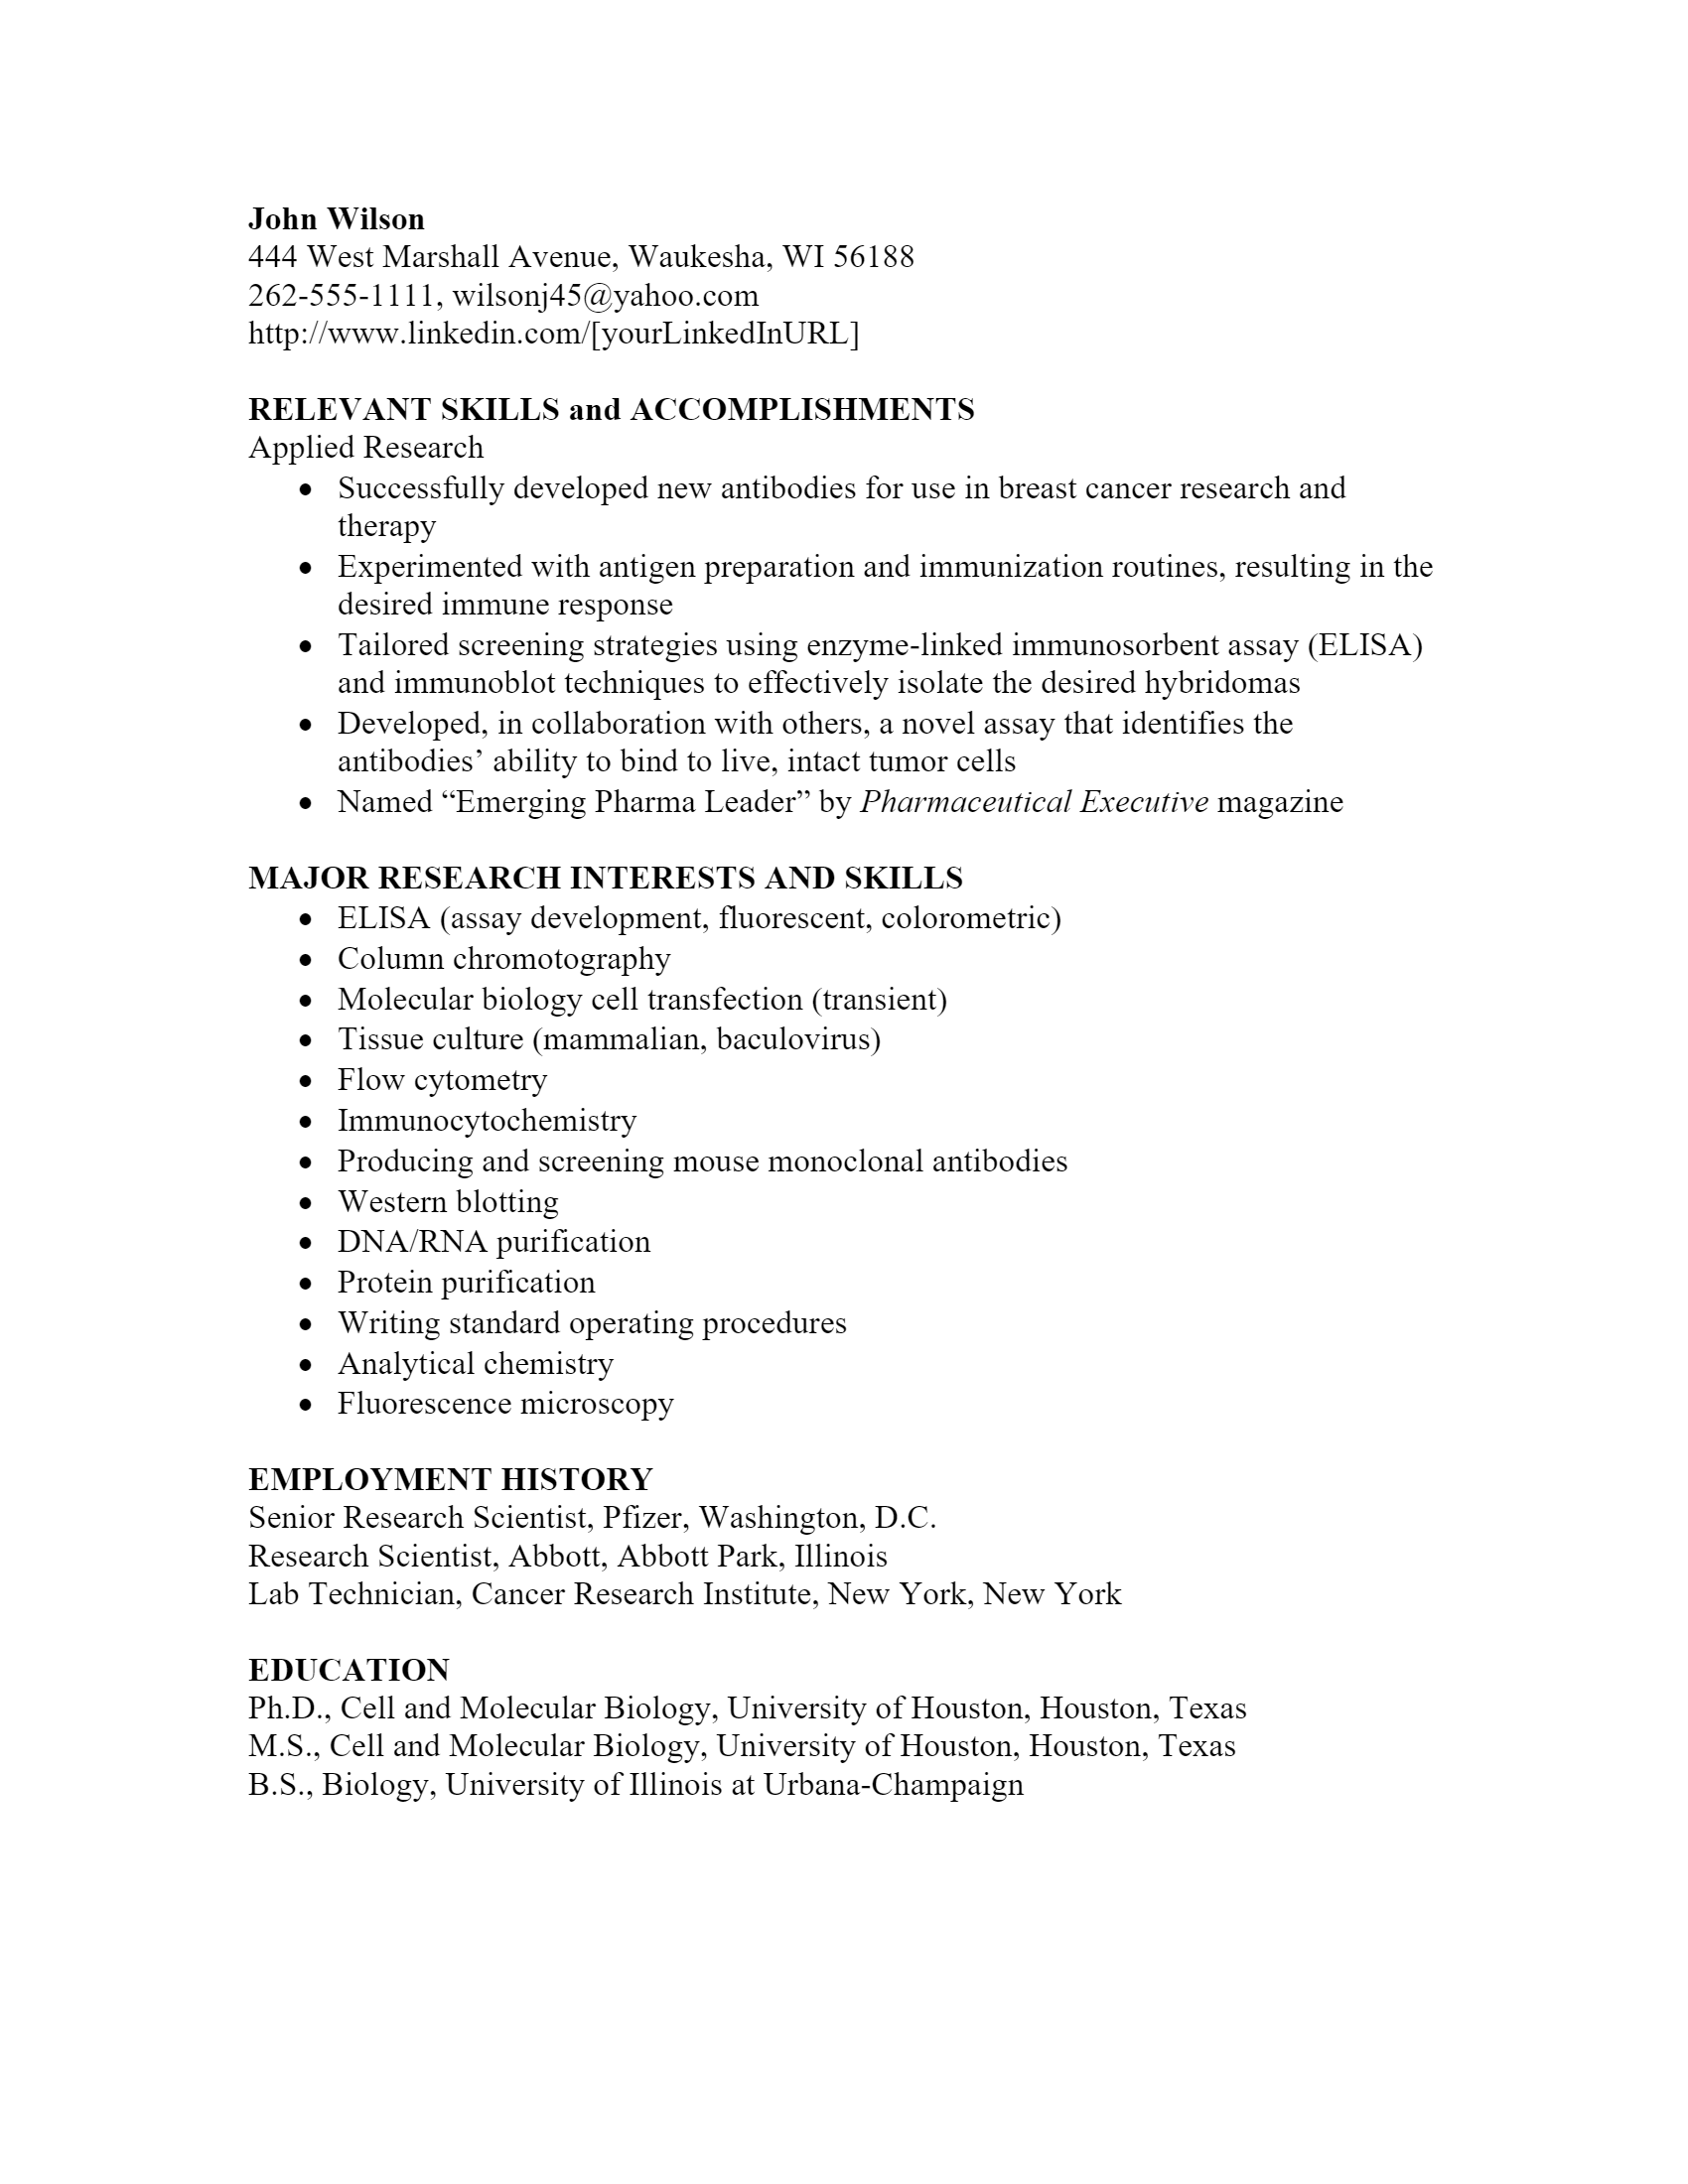 Healthcare Research Resume .Docx (Word)